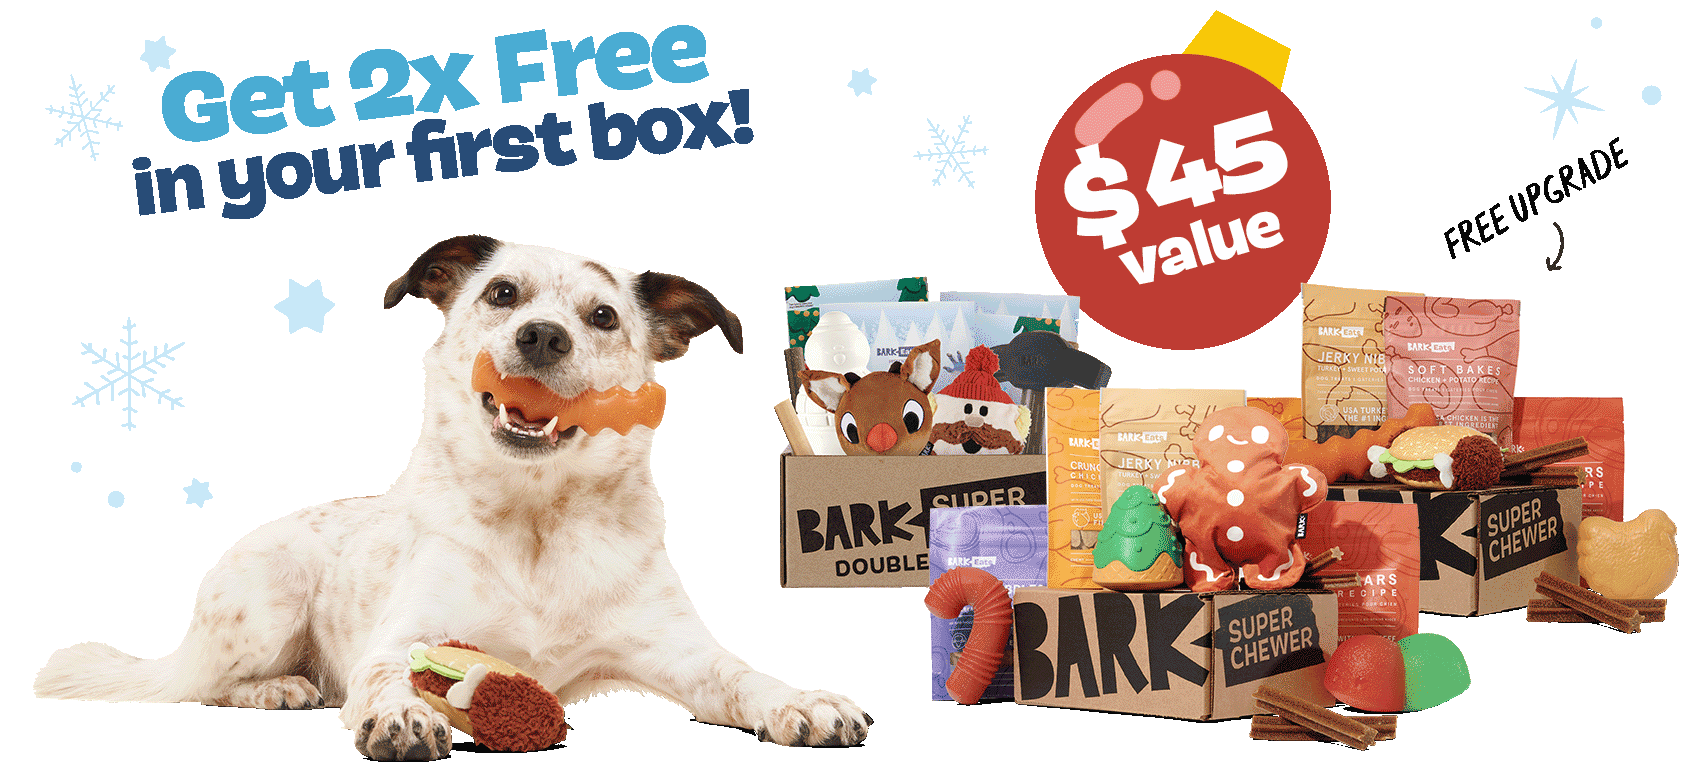 Get 2x Free in your first box! $45 value - FREE UPGRADE